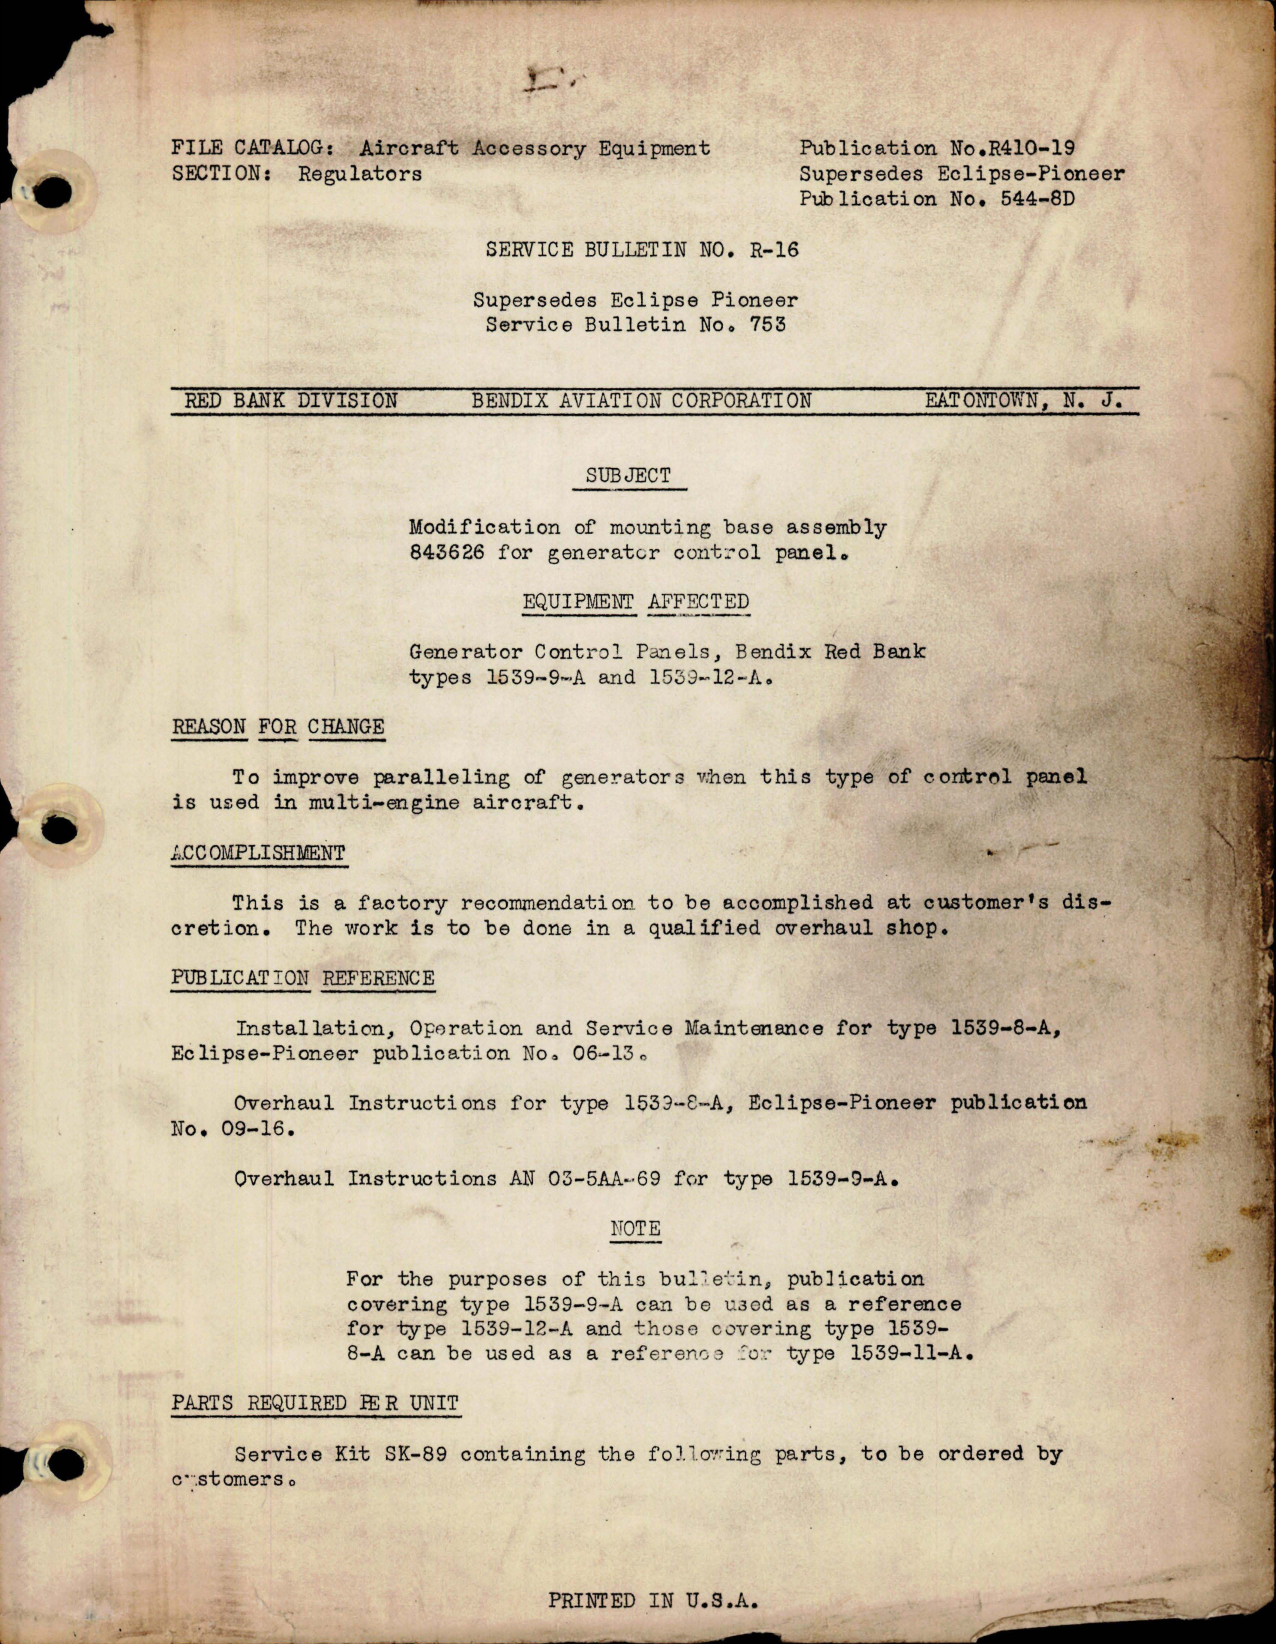 Sample page 1 from AirCorps Library document: Service Bulletin No. R-16, Modification of Mounting Base Assembly 843626 